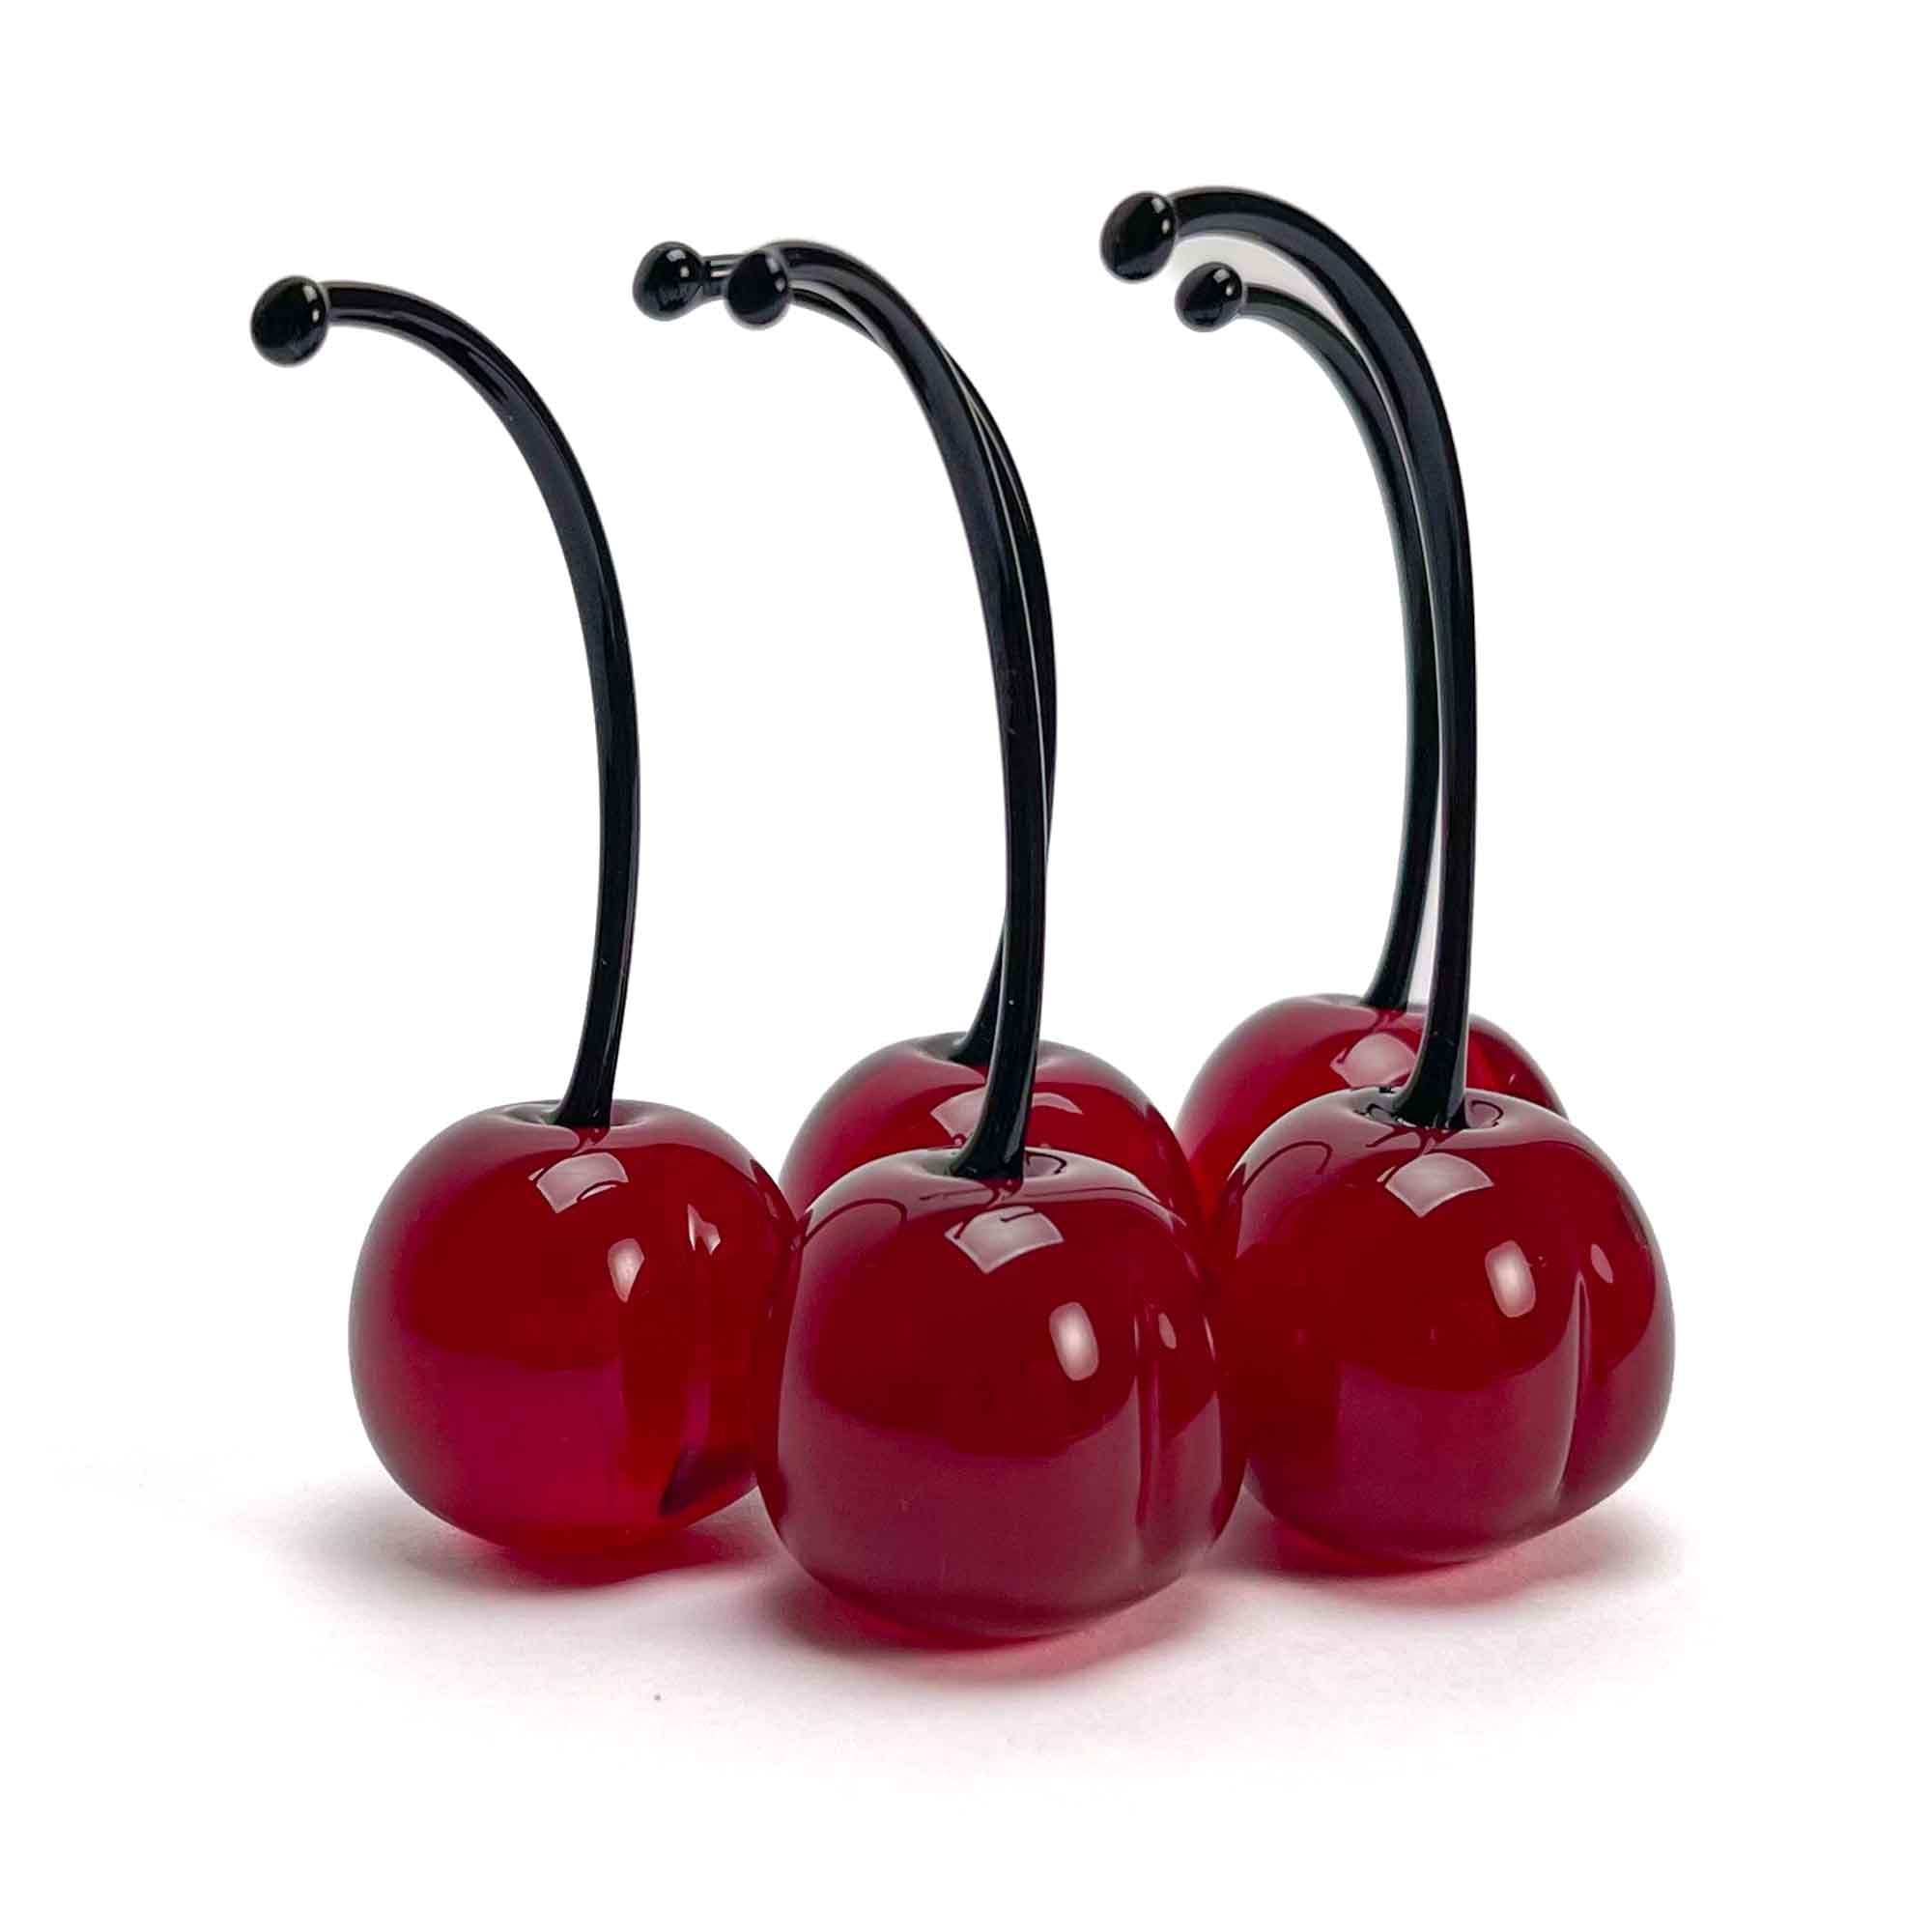 Natural Size Cherries